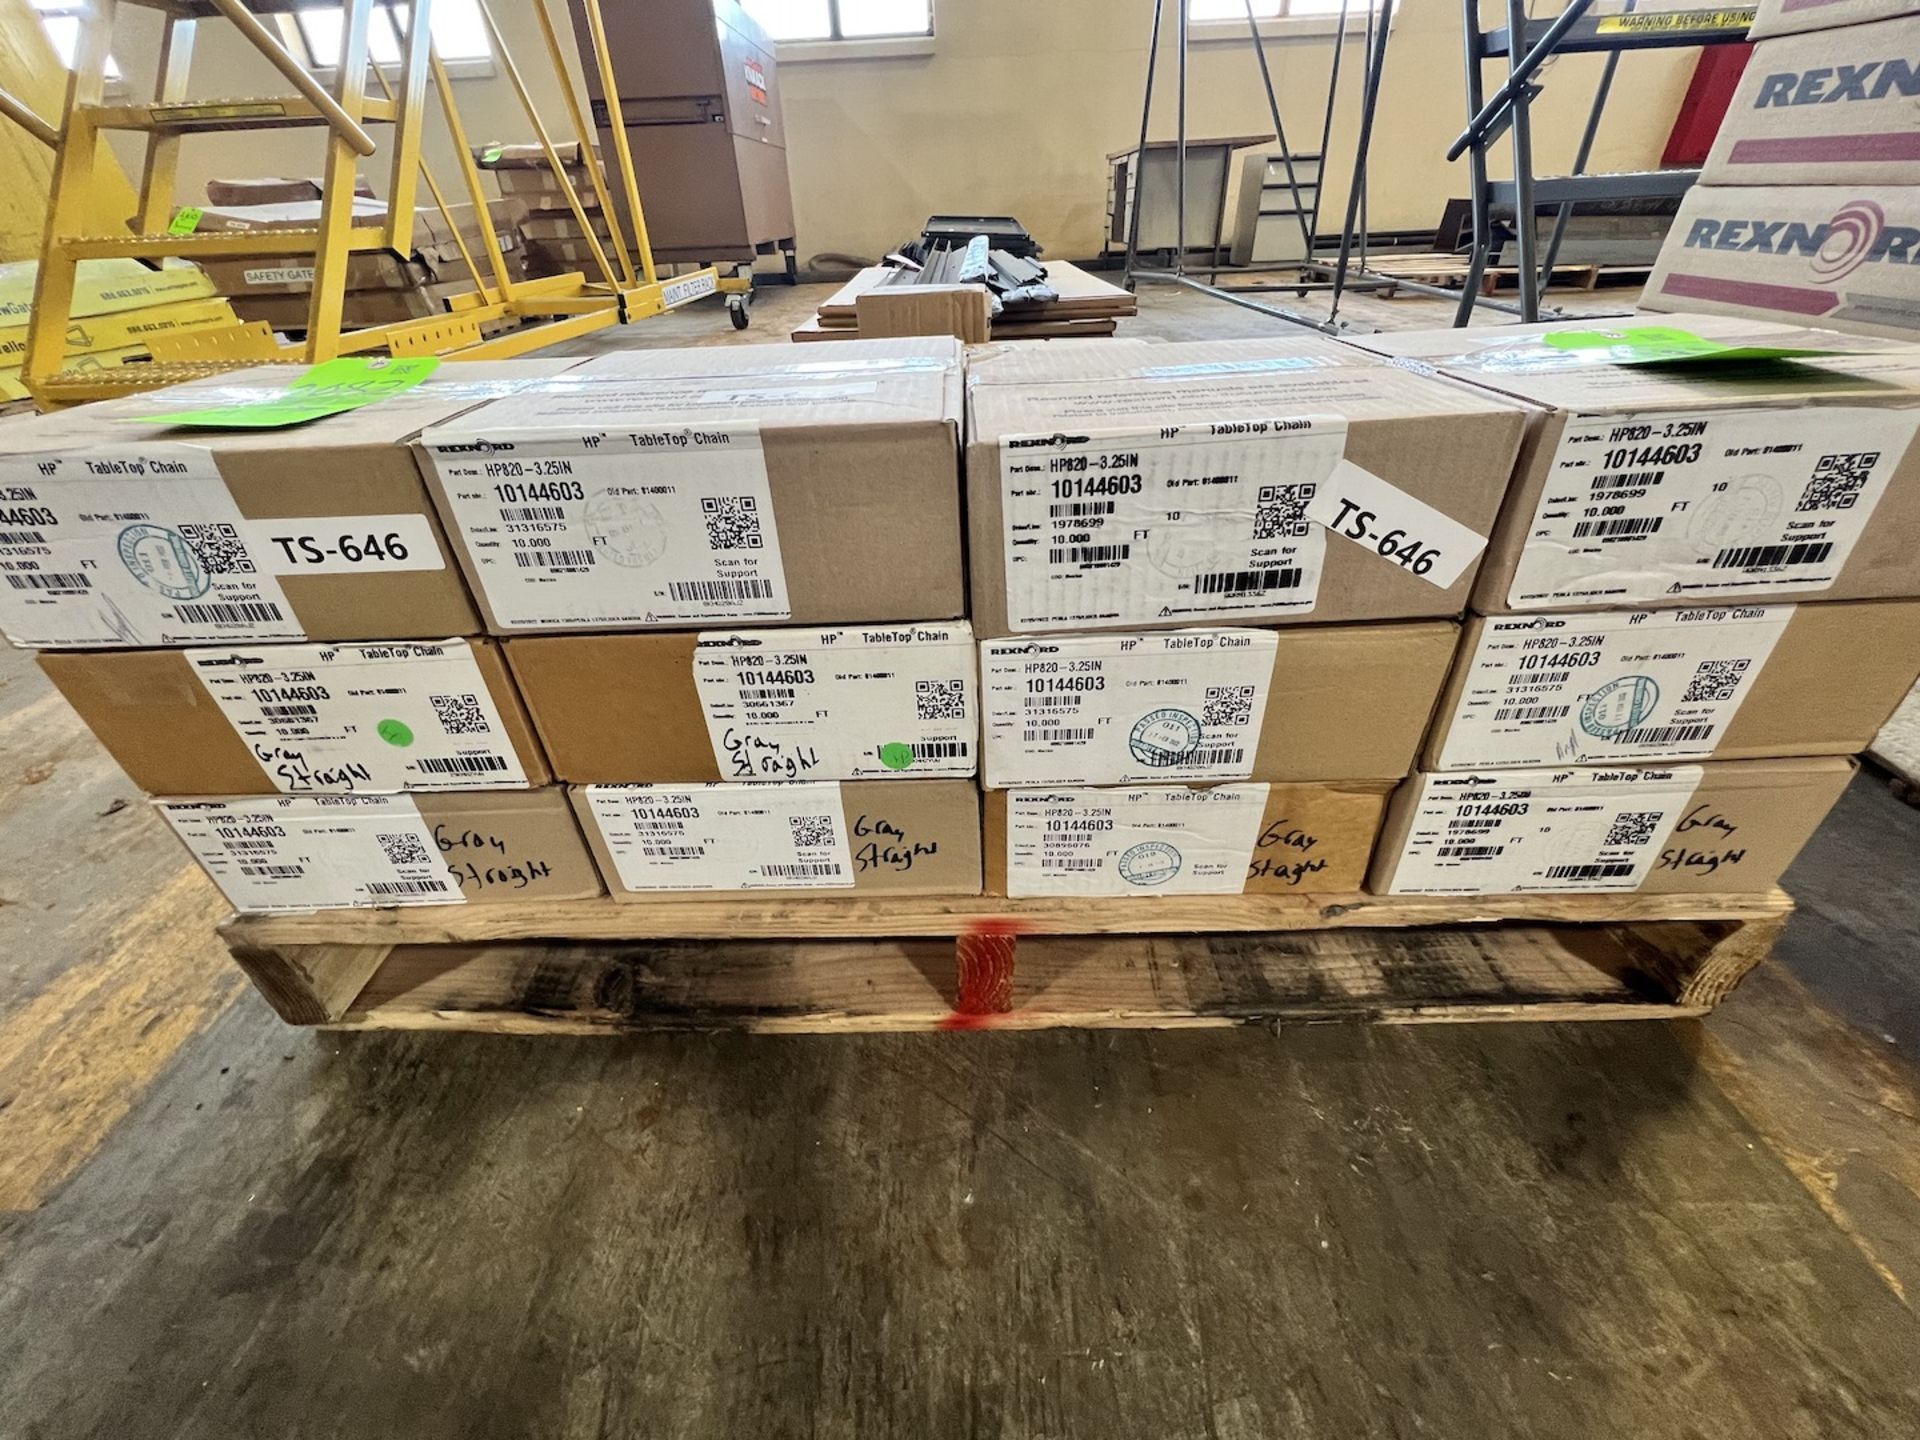 (12) BOXES OF NEW Rexnord TableTop Chain HP820, 3.25 Inch Wide , Part # 10144603, Box of 10' - Image 2 of 2